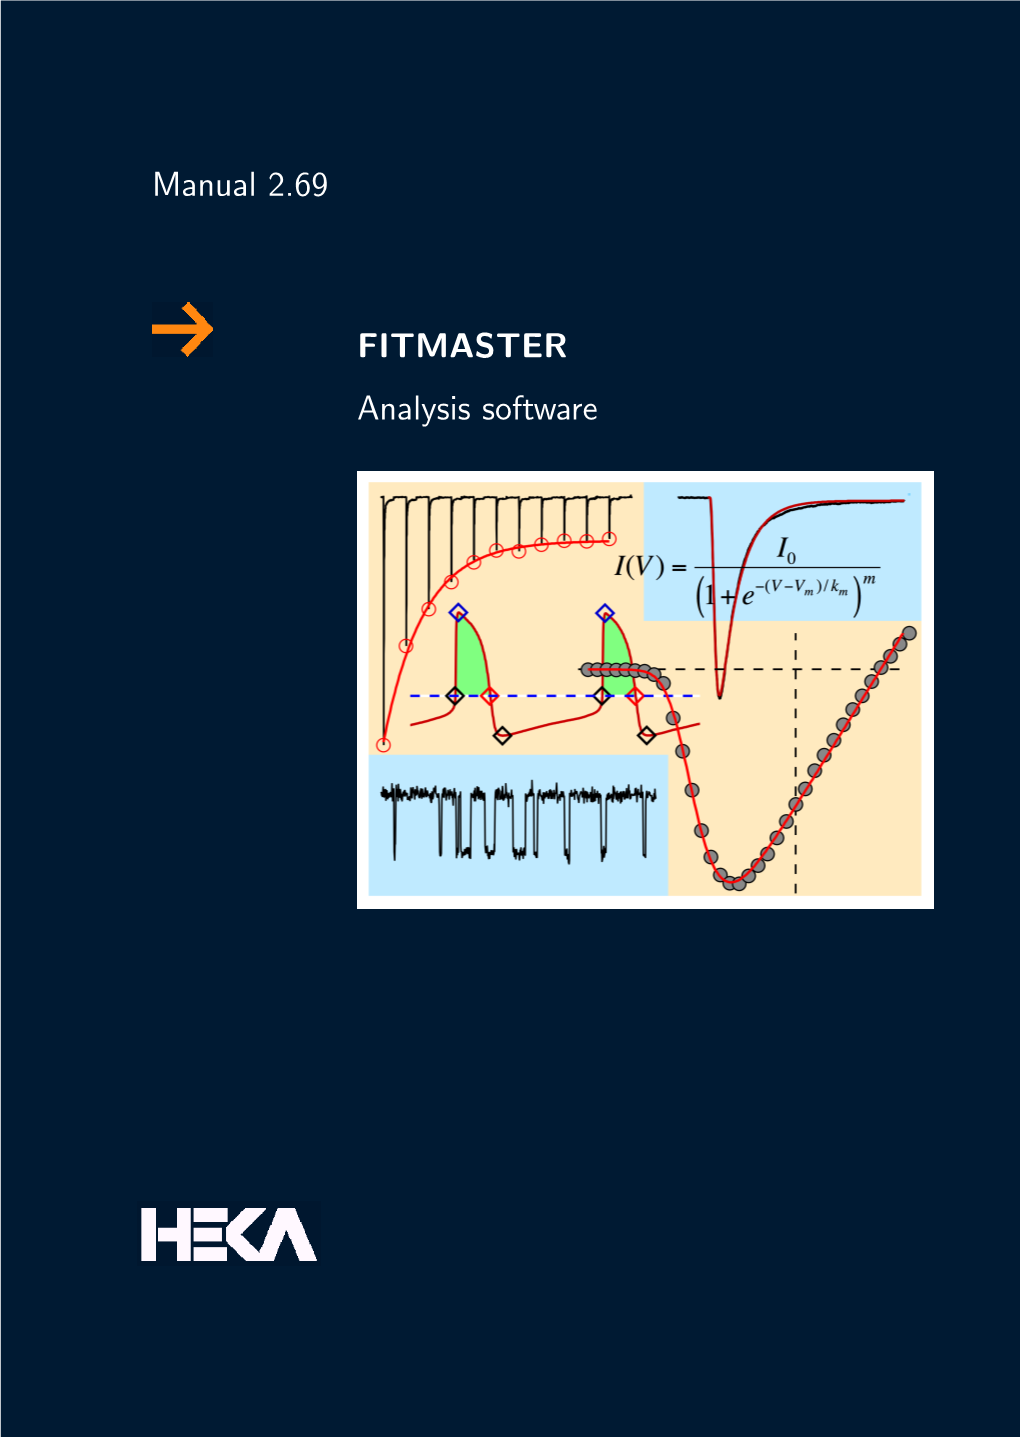 Manual 2.69 FITMASTER Analysis Software